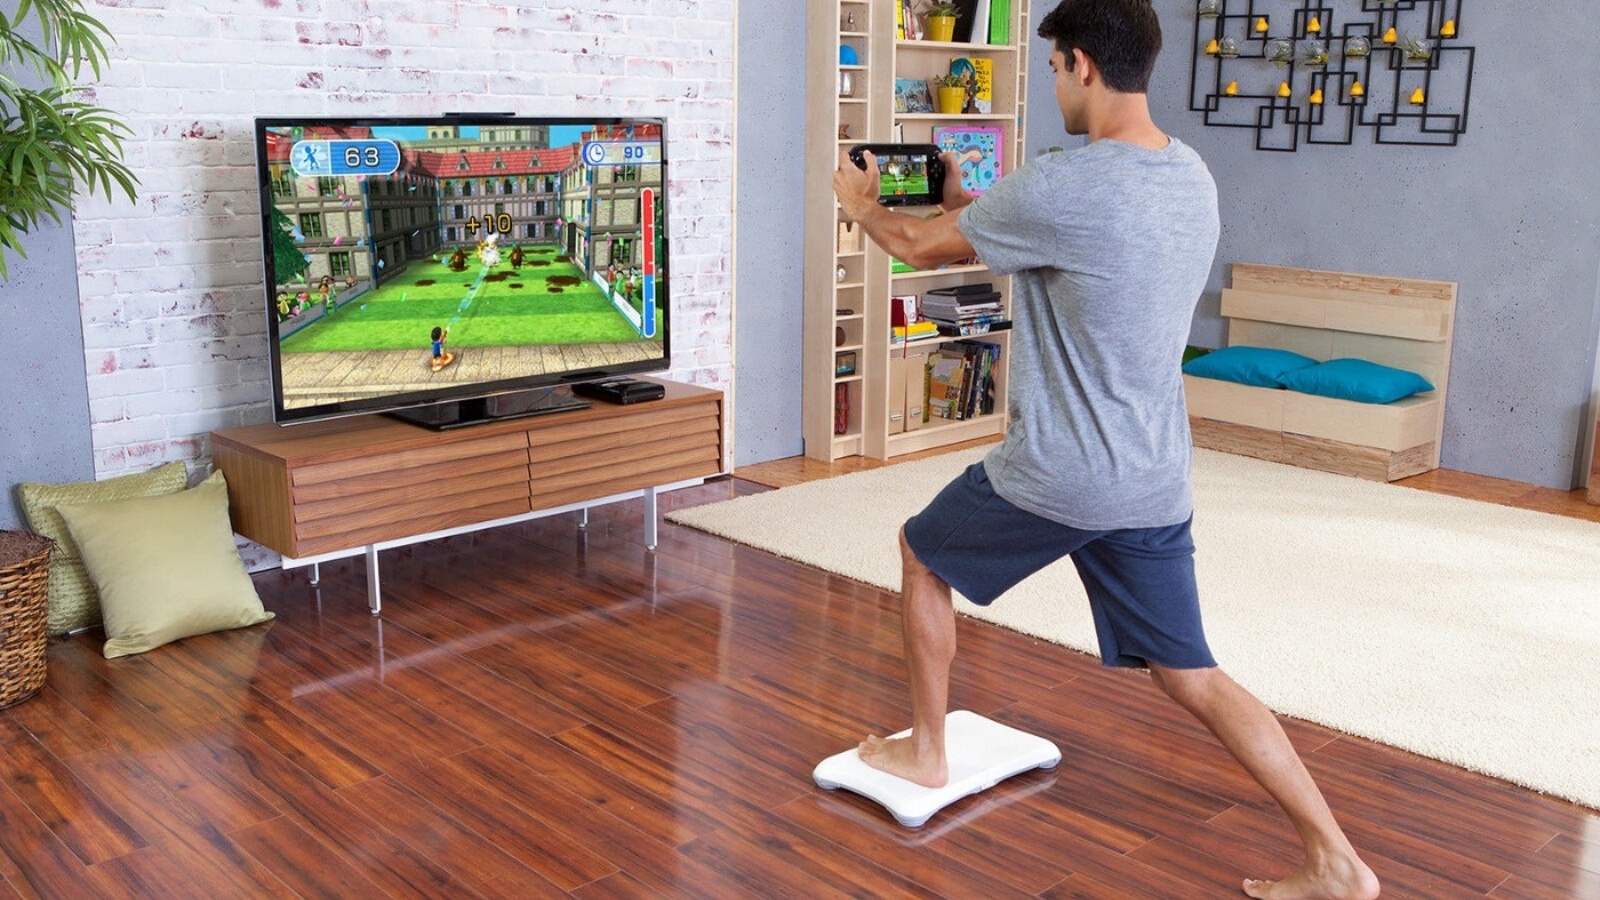 Nintendo's Wii Fit Balance Boards are now best used as welcome